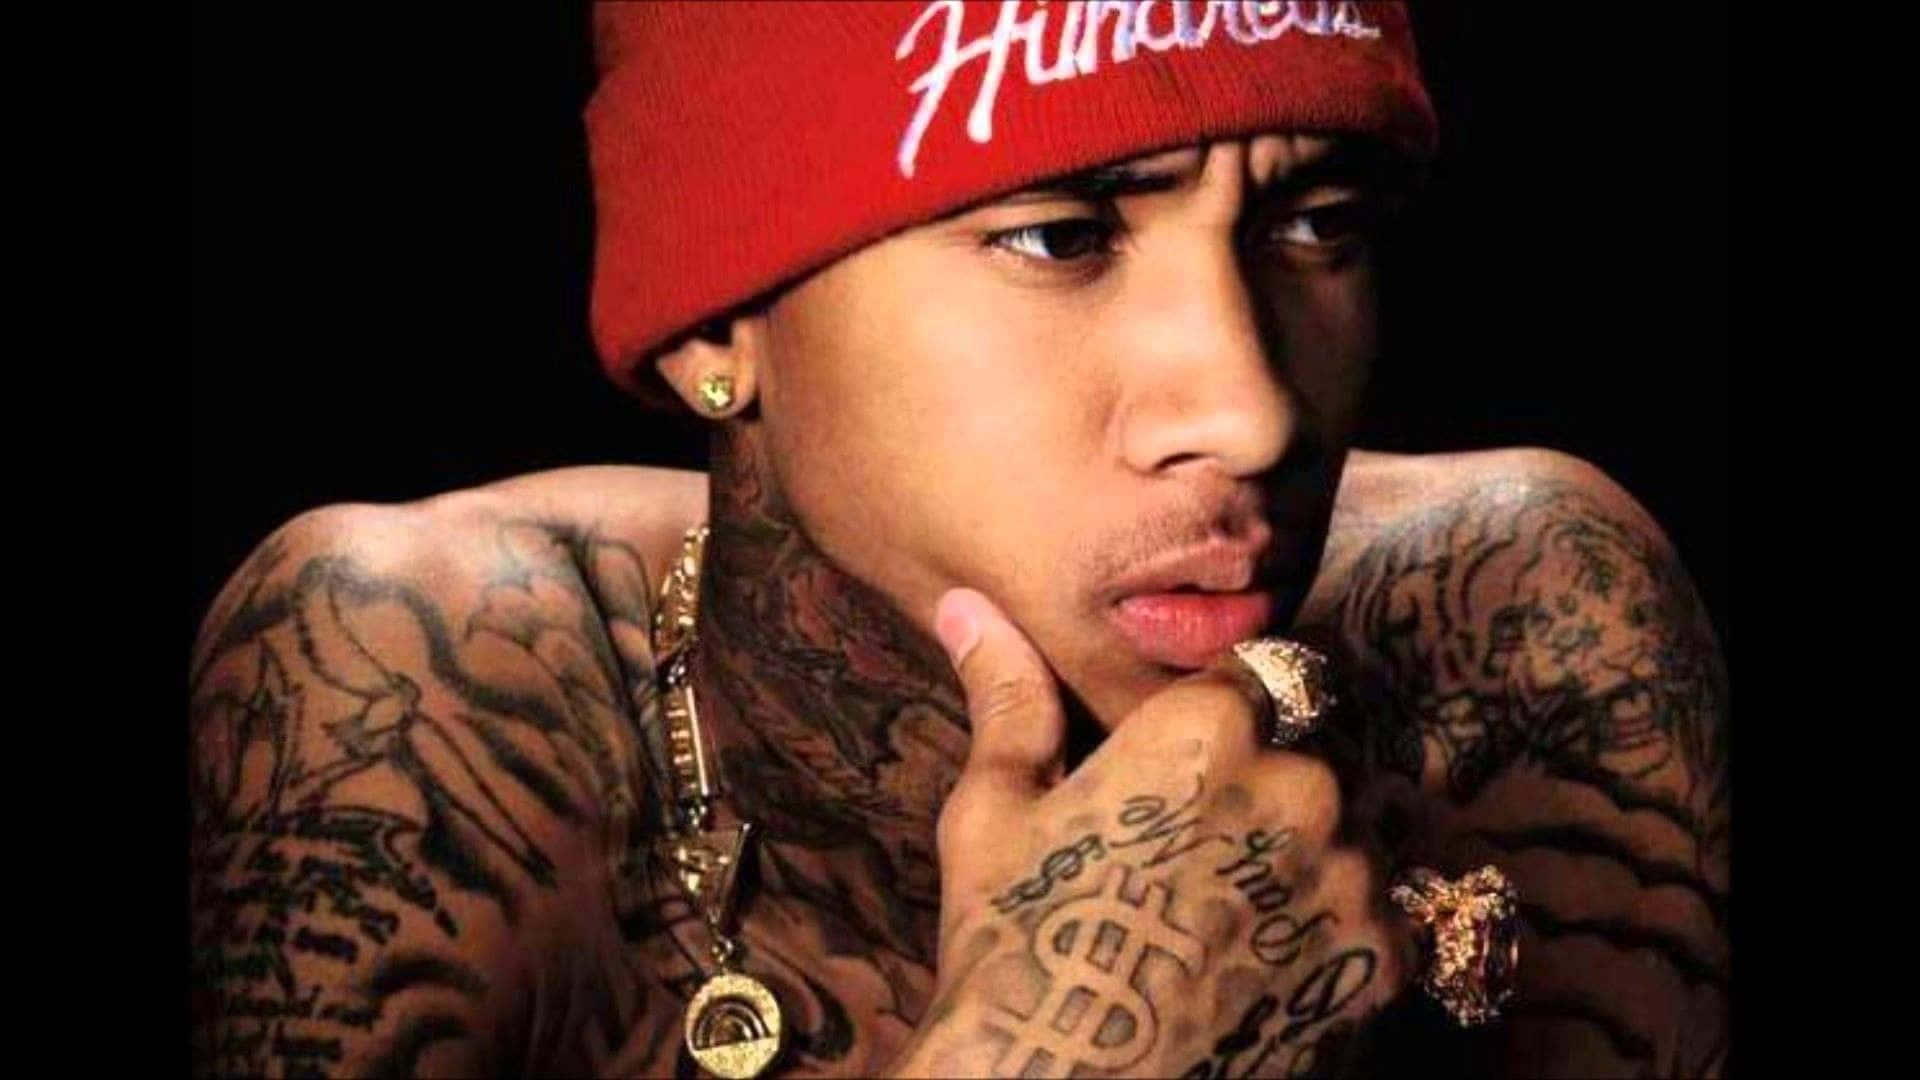 Rapper Tyga | Description: American rapper and entertainer Tyrone William Griffin Jr, or Tyga, poses confidently against a bright red backdrop. | Keywords: Tyga, rap, hip hop, entertainer, musician, Tyrone William Griffin Jr. Wallpaper